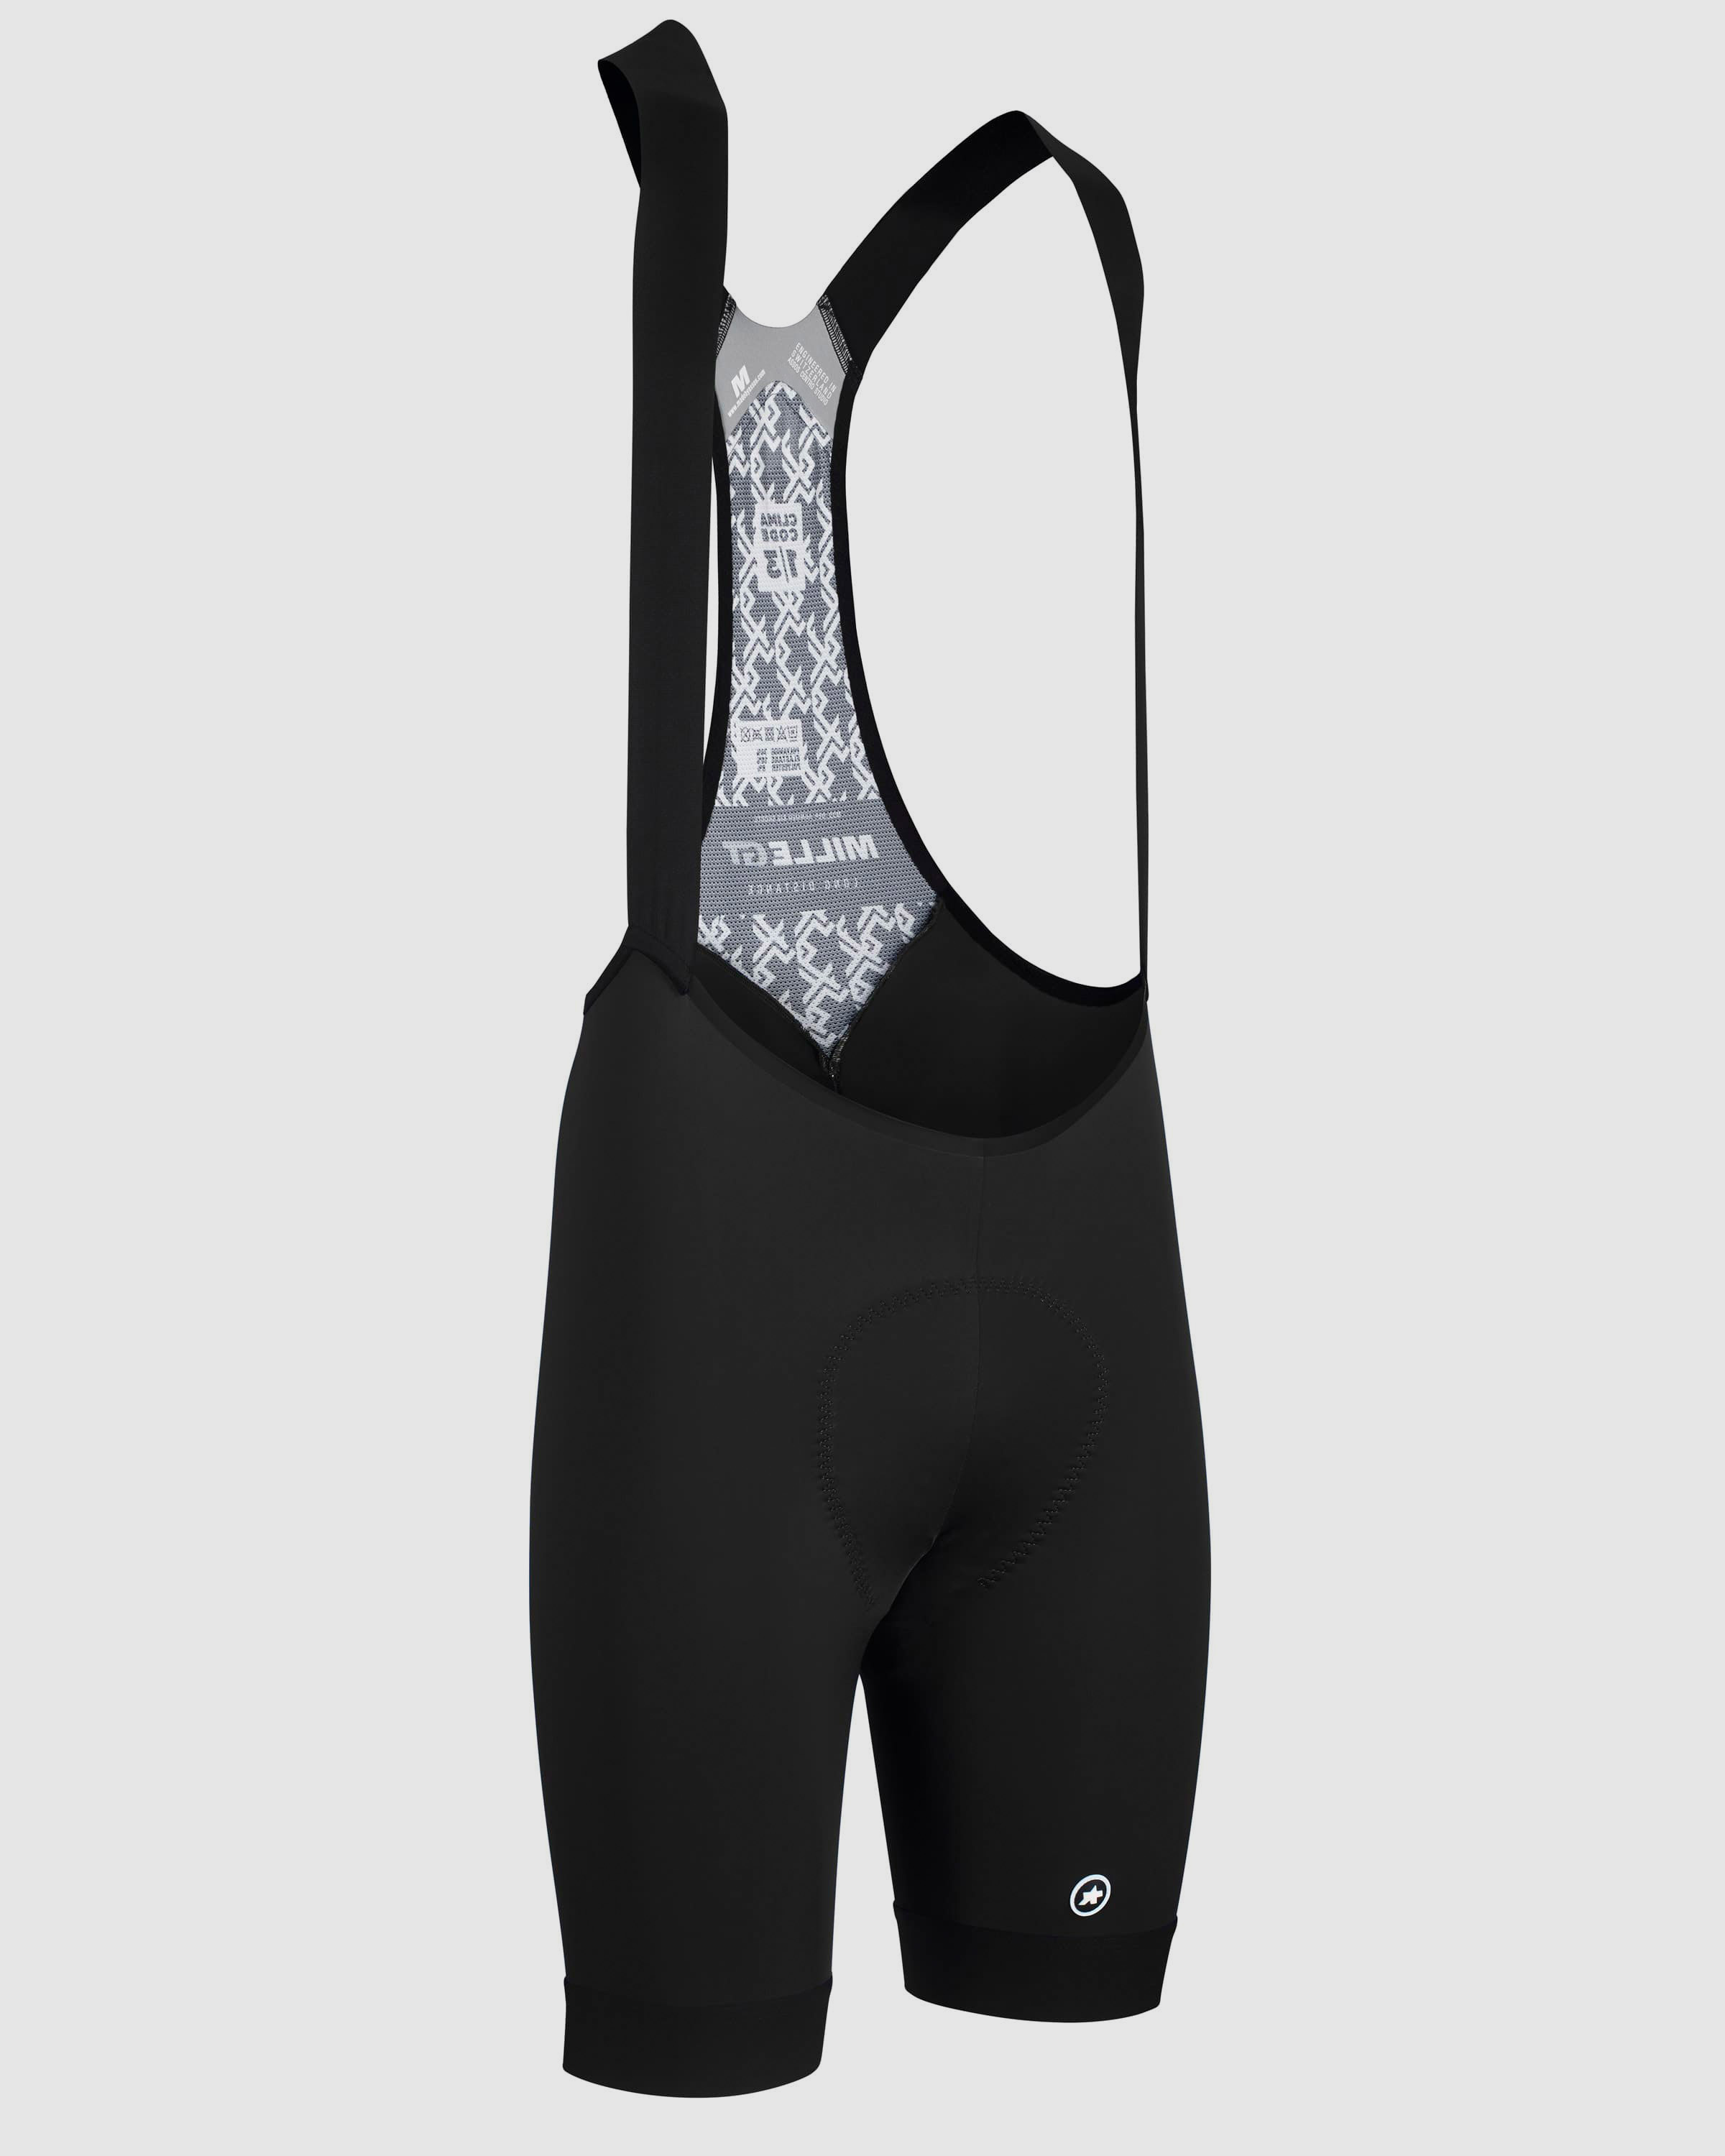 MILLE GT Bib Shorts - ASSOS Of Switzerland - Official Outlet